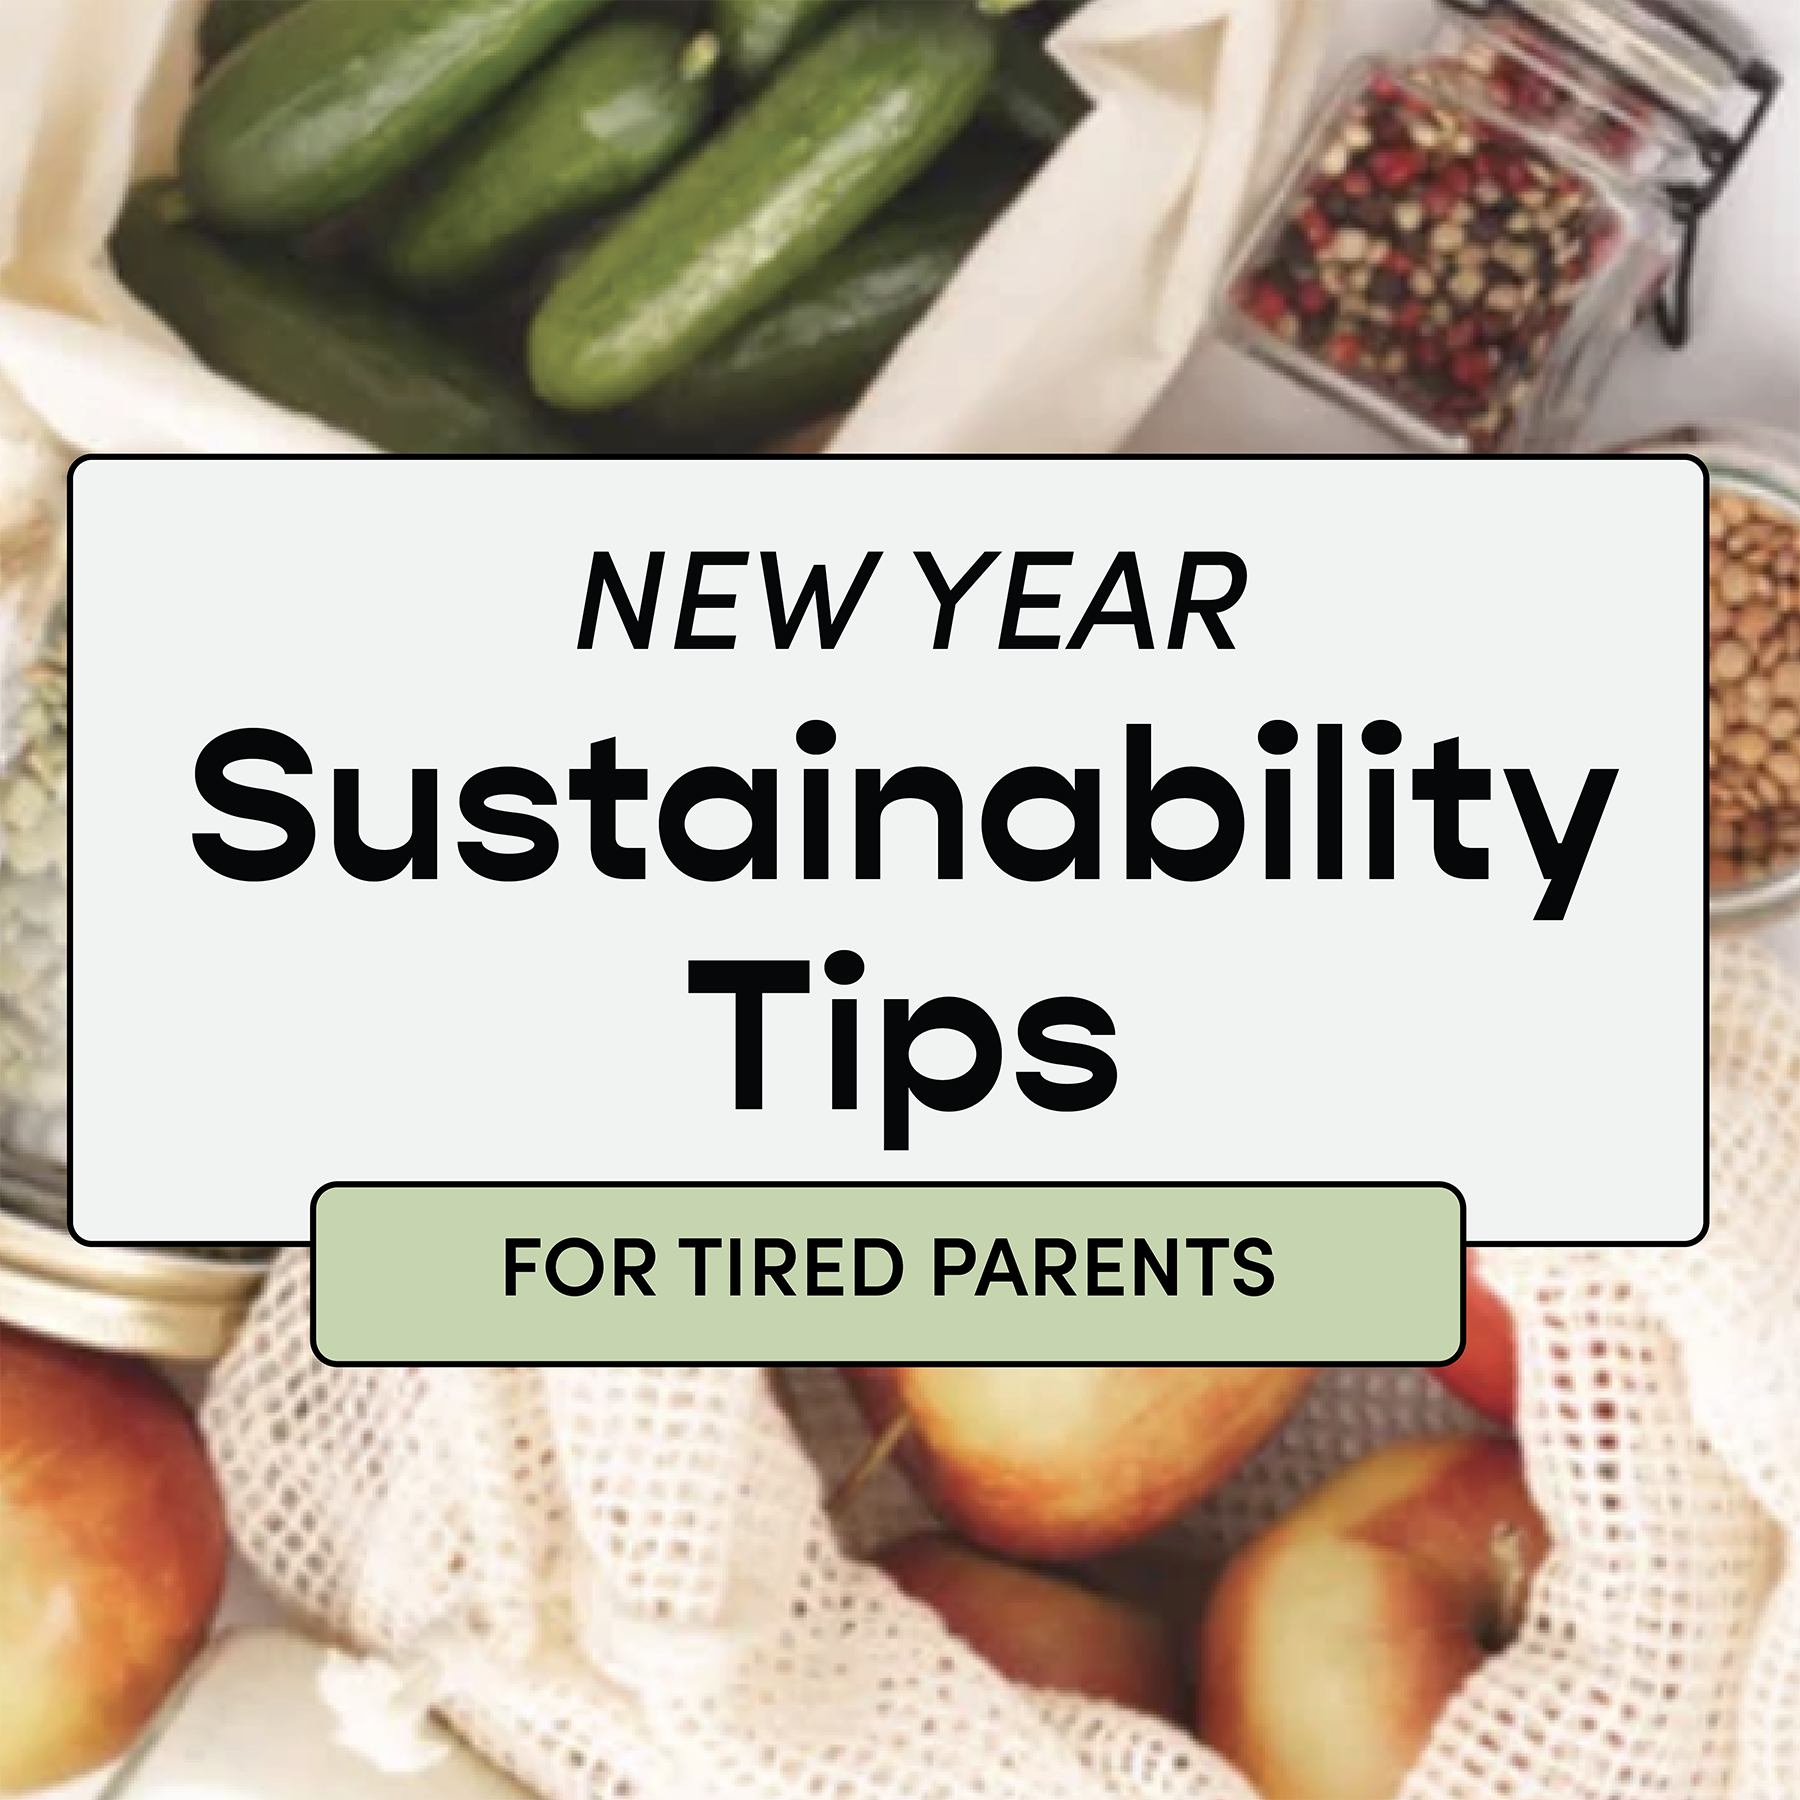 New Year Sustainability resolutions and tips for tired parents